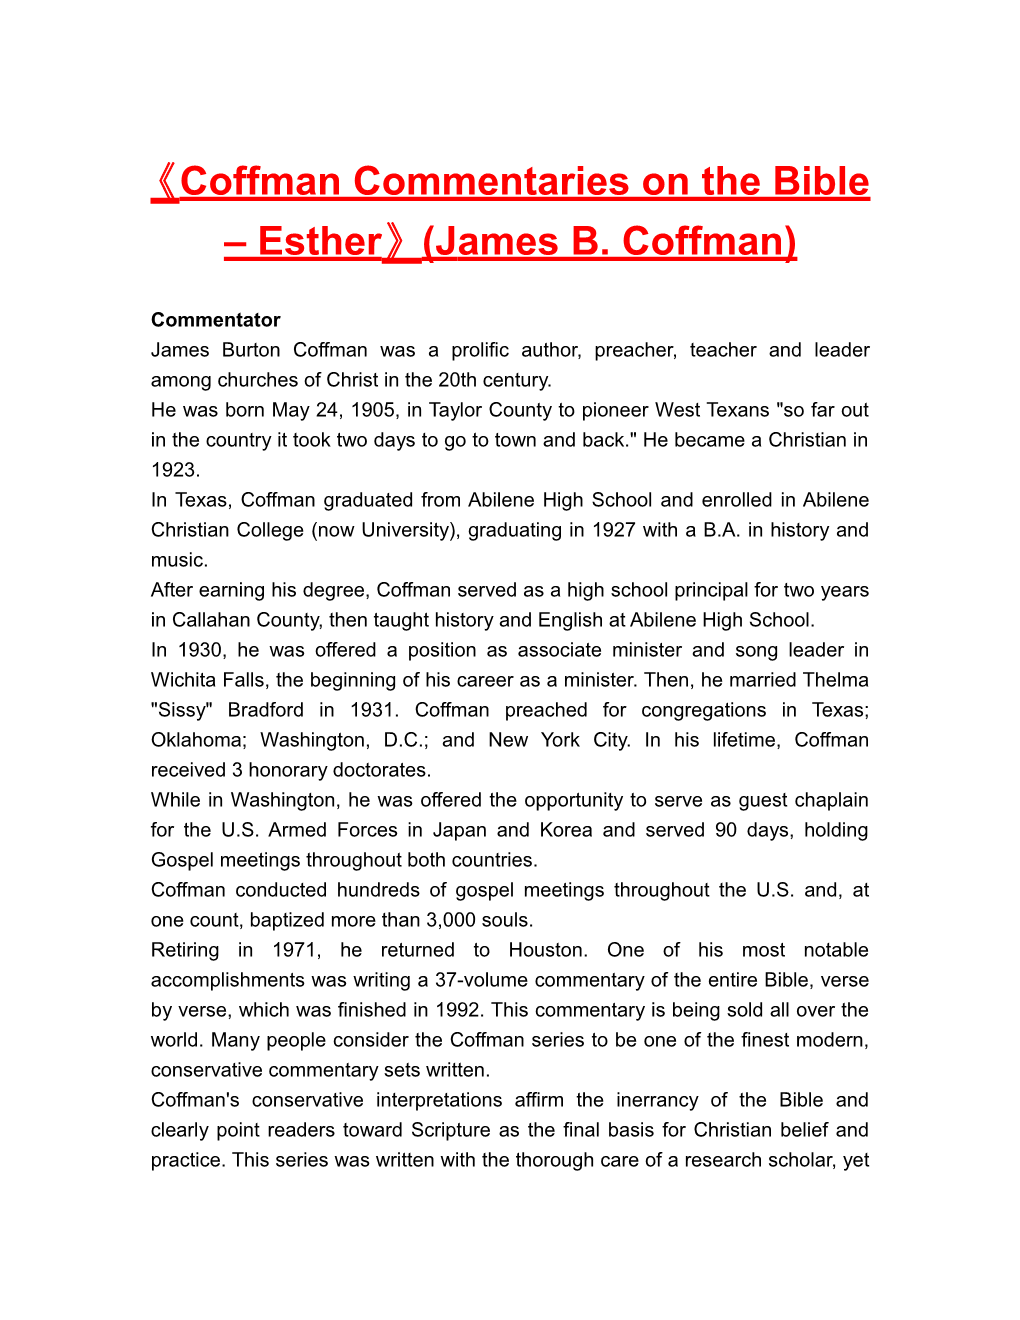 Coffman Commentaries on the Bible Esther (James B. Coffman)